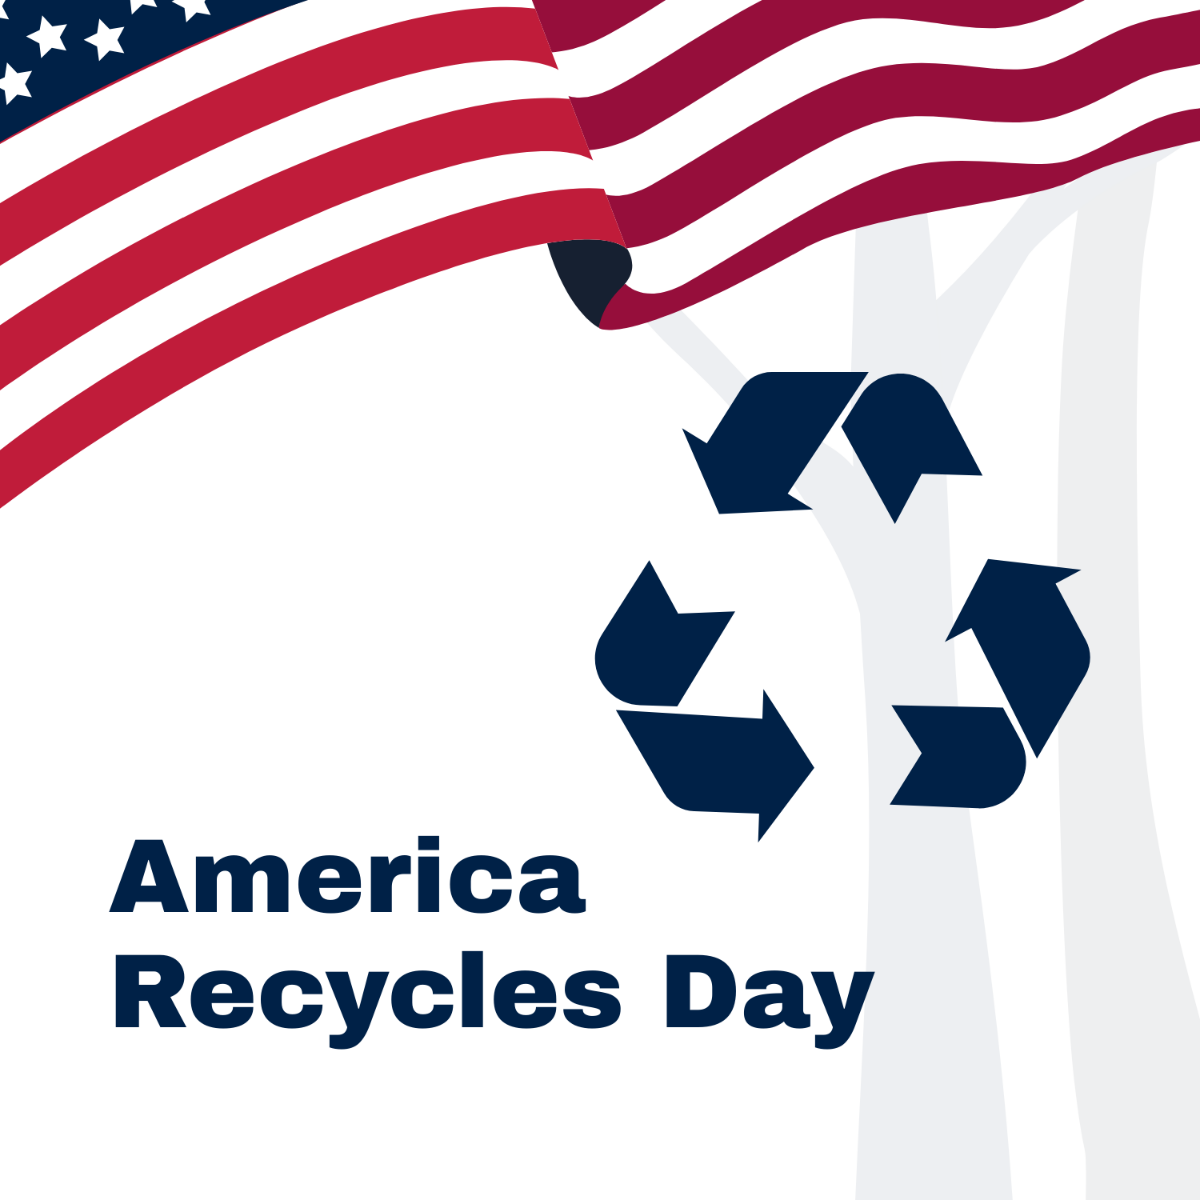 Free America Recycles Day Vector Template